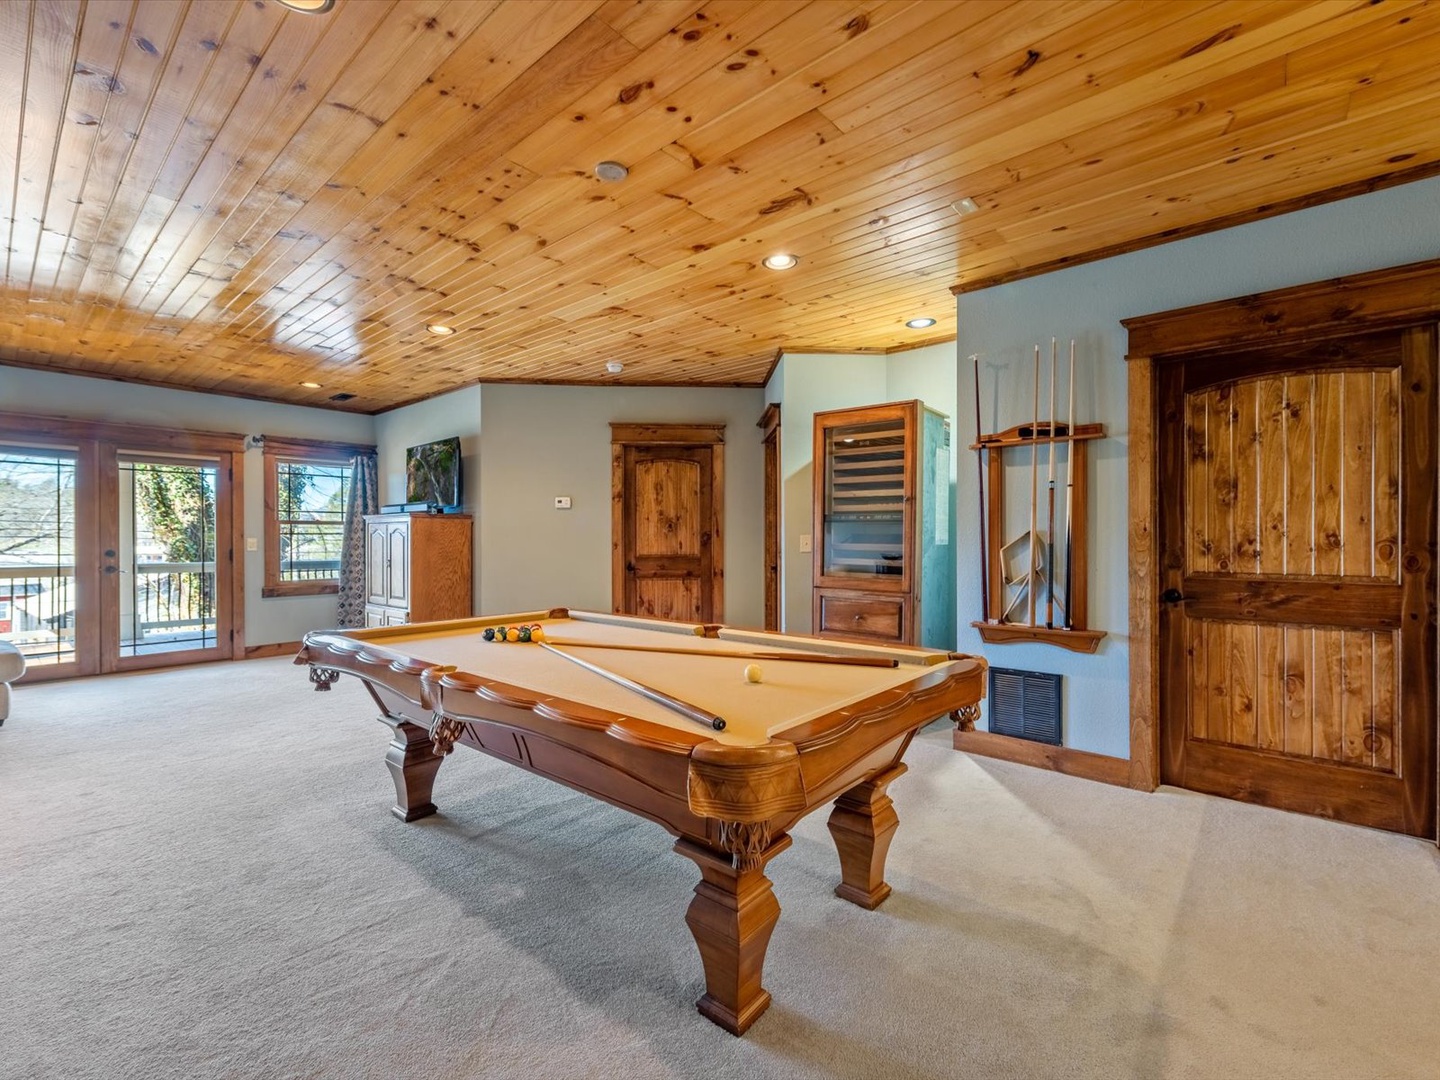 Blue Ridge Cottage - Lower Level Entertainment Area with Pool Table